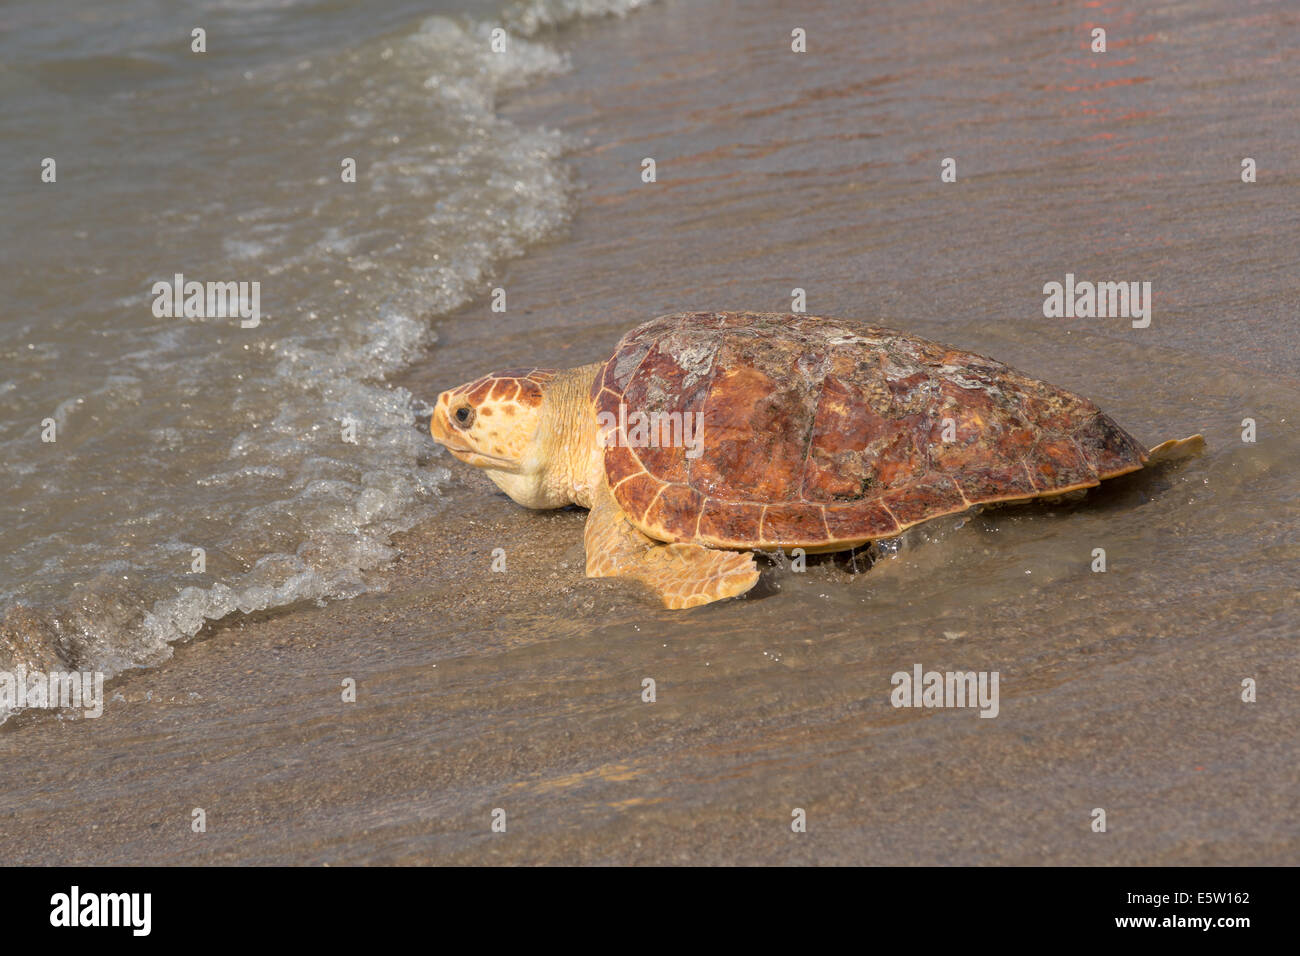 Mitchell, a 65-pound juvenile loggerhead sea turtle crawls back to the ocean during the release of rehabilitated sea turtles August 6, 2014 in Isle of Palms, South Carolina. The turtle was found entangled in a fishing line, malnourished and covered in barnacles and rehabilitated by the sea turtle hospital at the South Carolina Aquarium in Charleston. Stock Photo